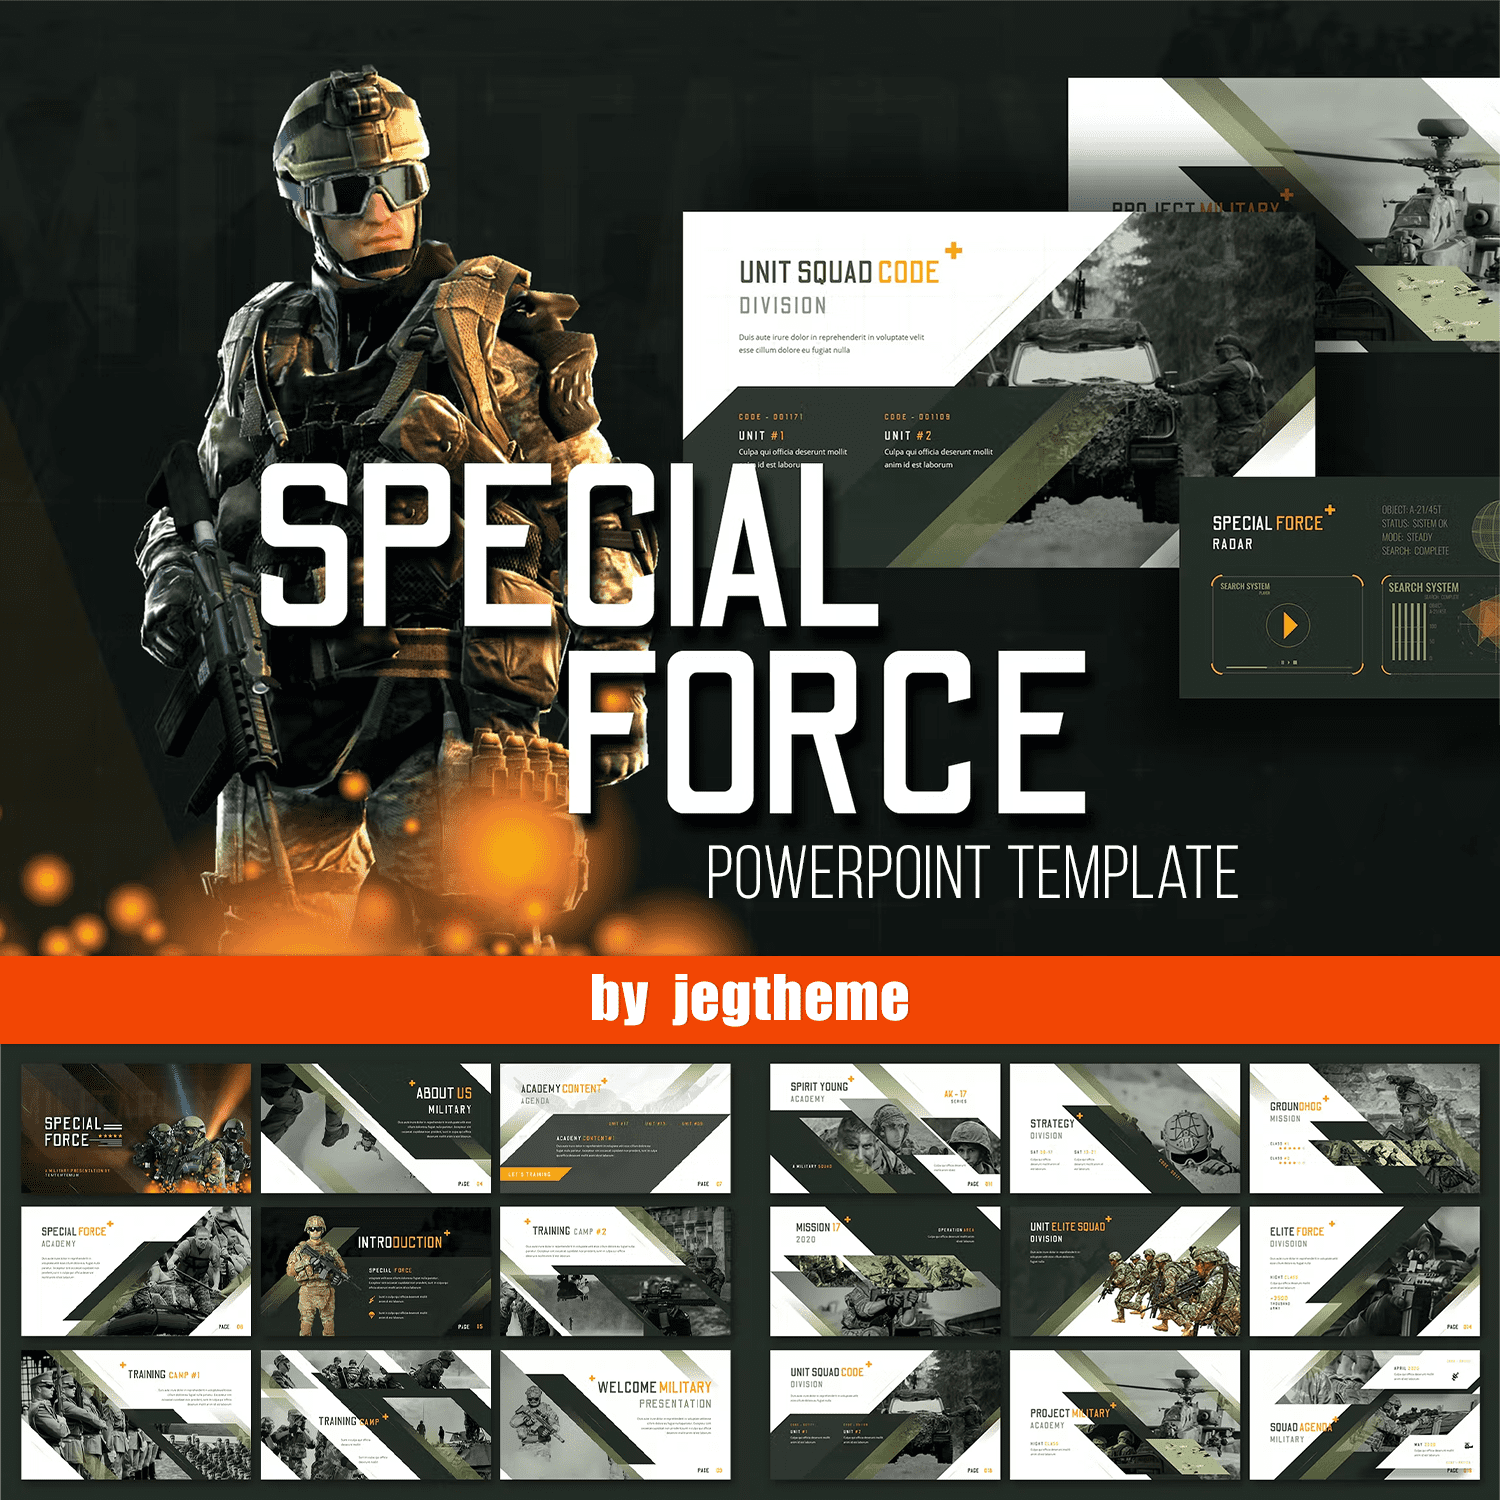 Special Force - Powerpoint Template.